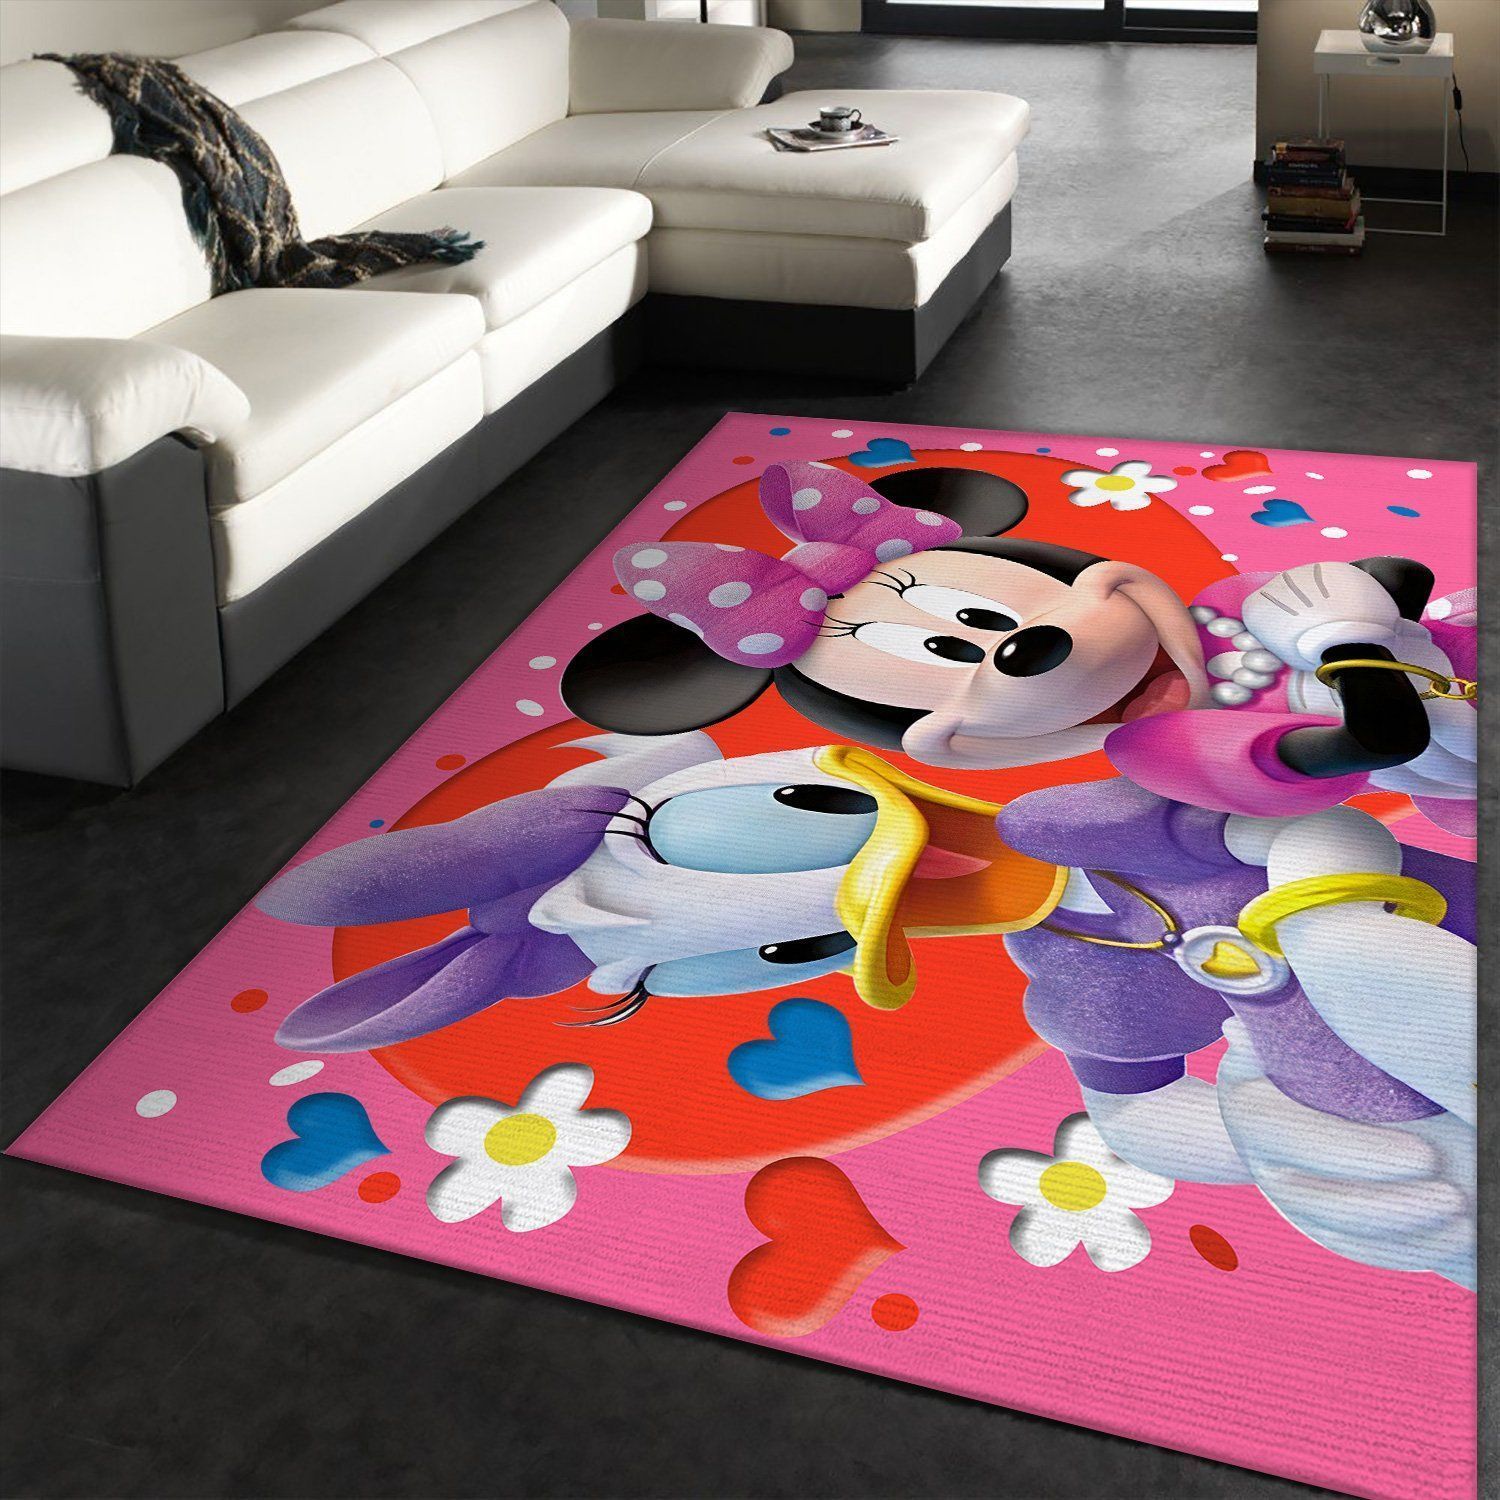 Minnie Mouse Area Rugs Disney Movies Living Room Carpet FN121208 Local Brands Floor Decor The US Decor - Indoor Outdoor Rugs